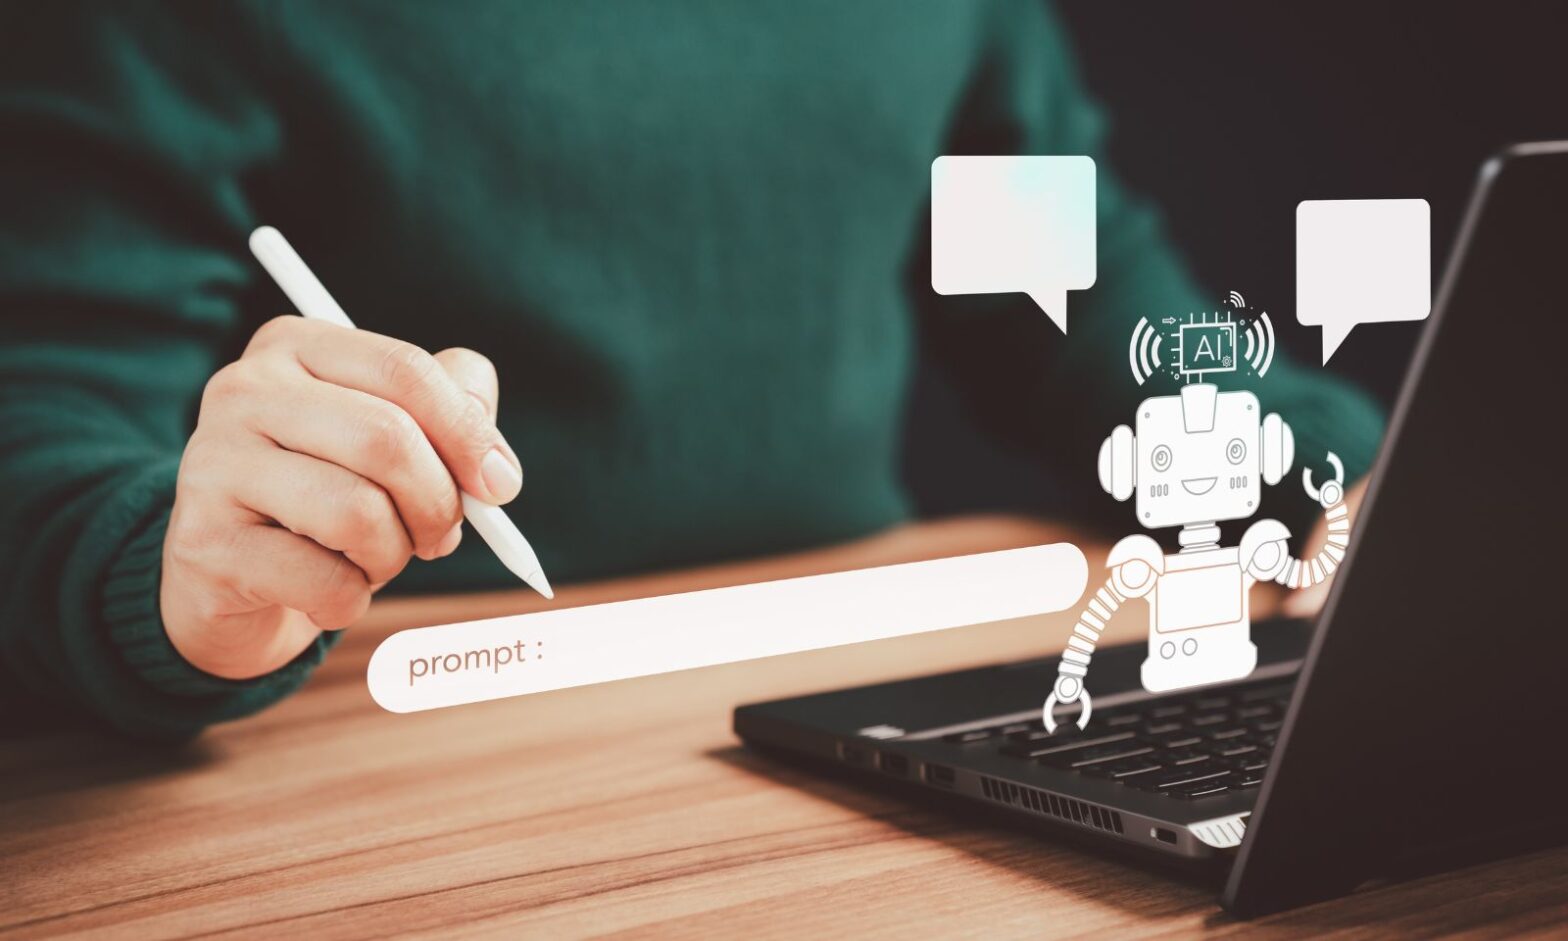 Featured image for post: Next-Gen Chatbots Are Enhancing Customer Service with AI